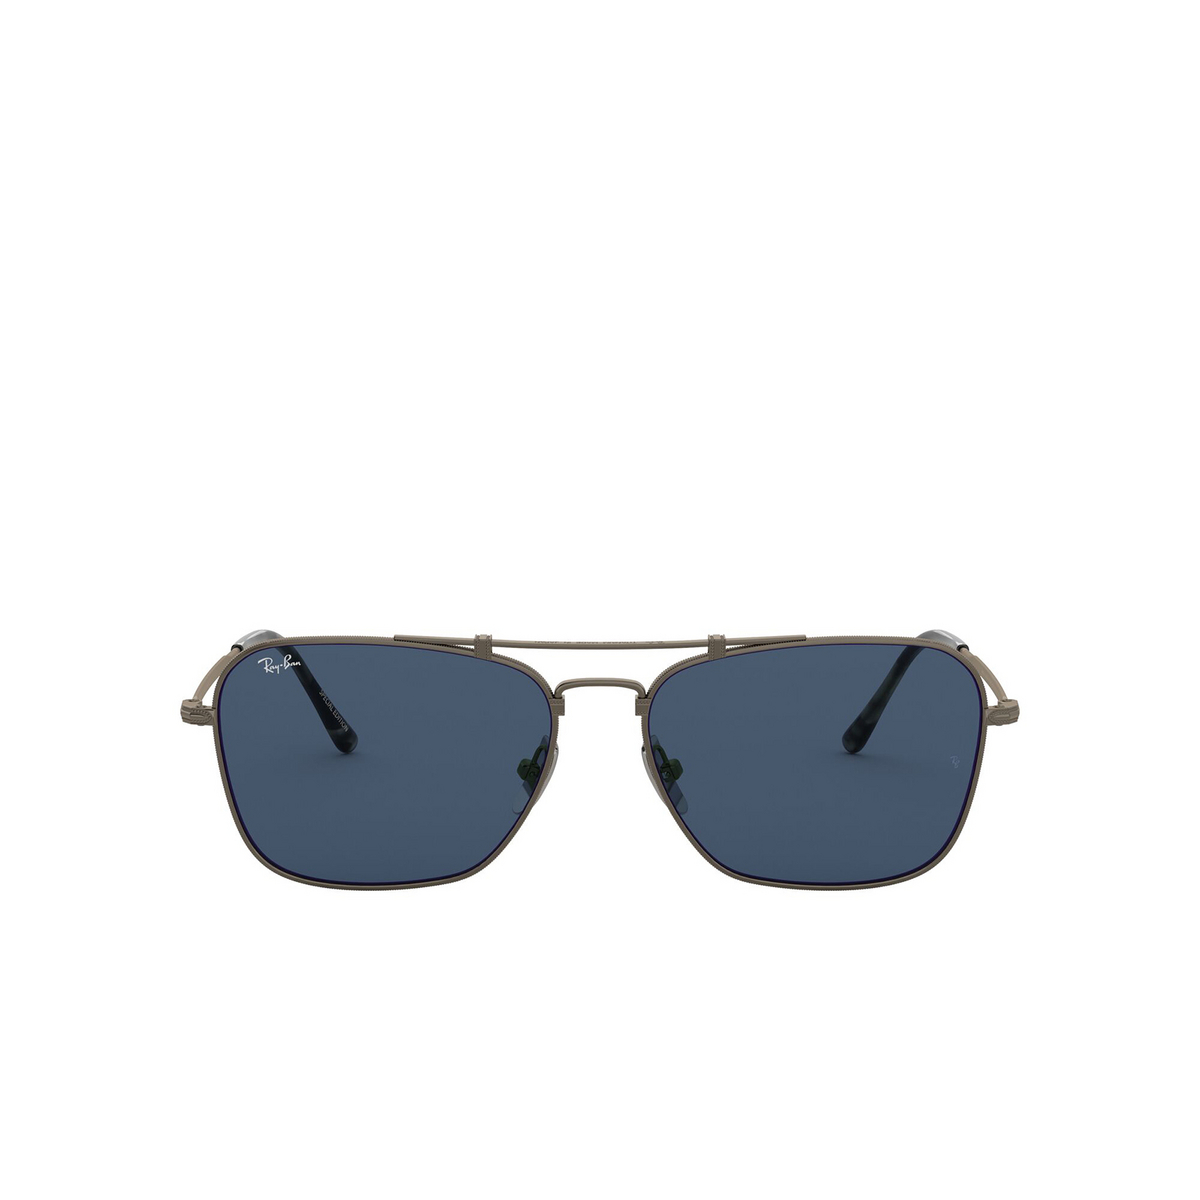 Ray-Ban® Square Sunglasses: Titanium RB8136 color Demi Gloss Pewter 9138T0 - front view.